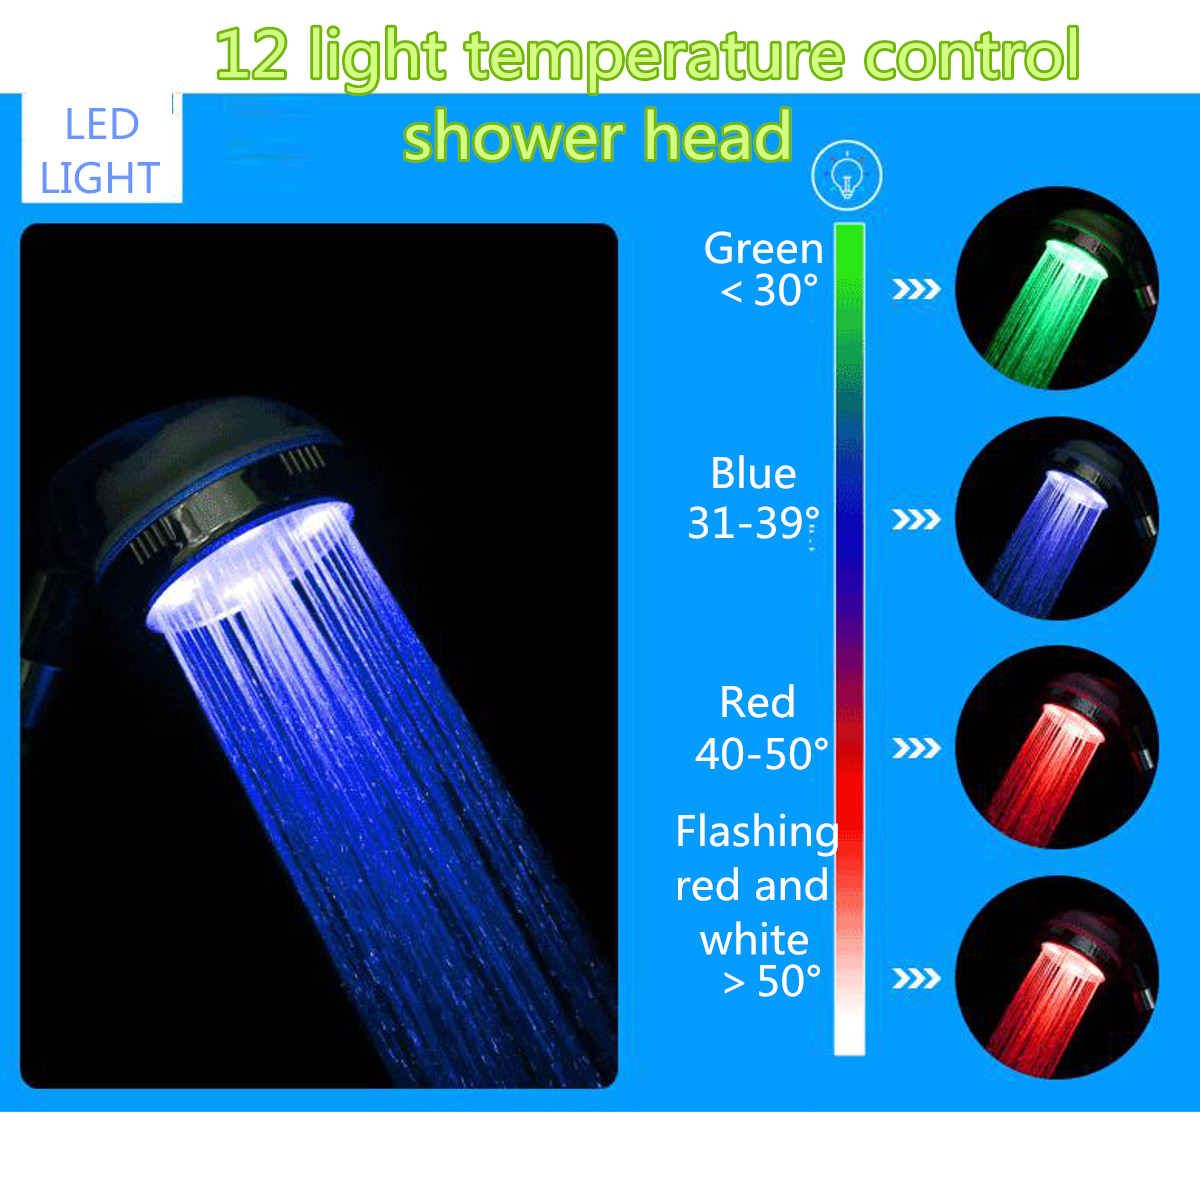 3-Colors-Changing-LED-Light-Shower-Head-Handheld-Boosting-Filtration-Water-Head-1376993